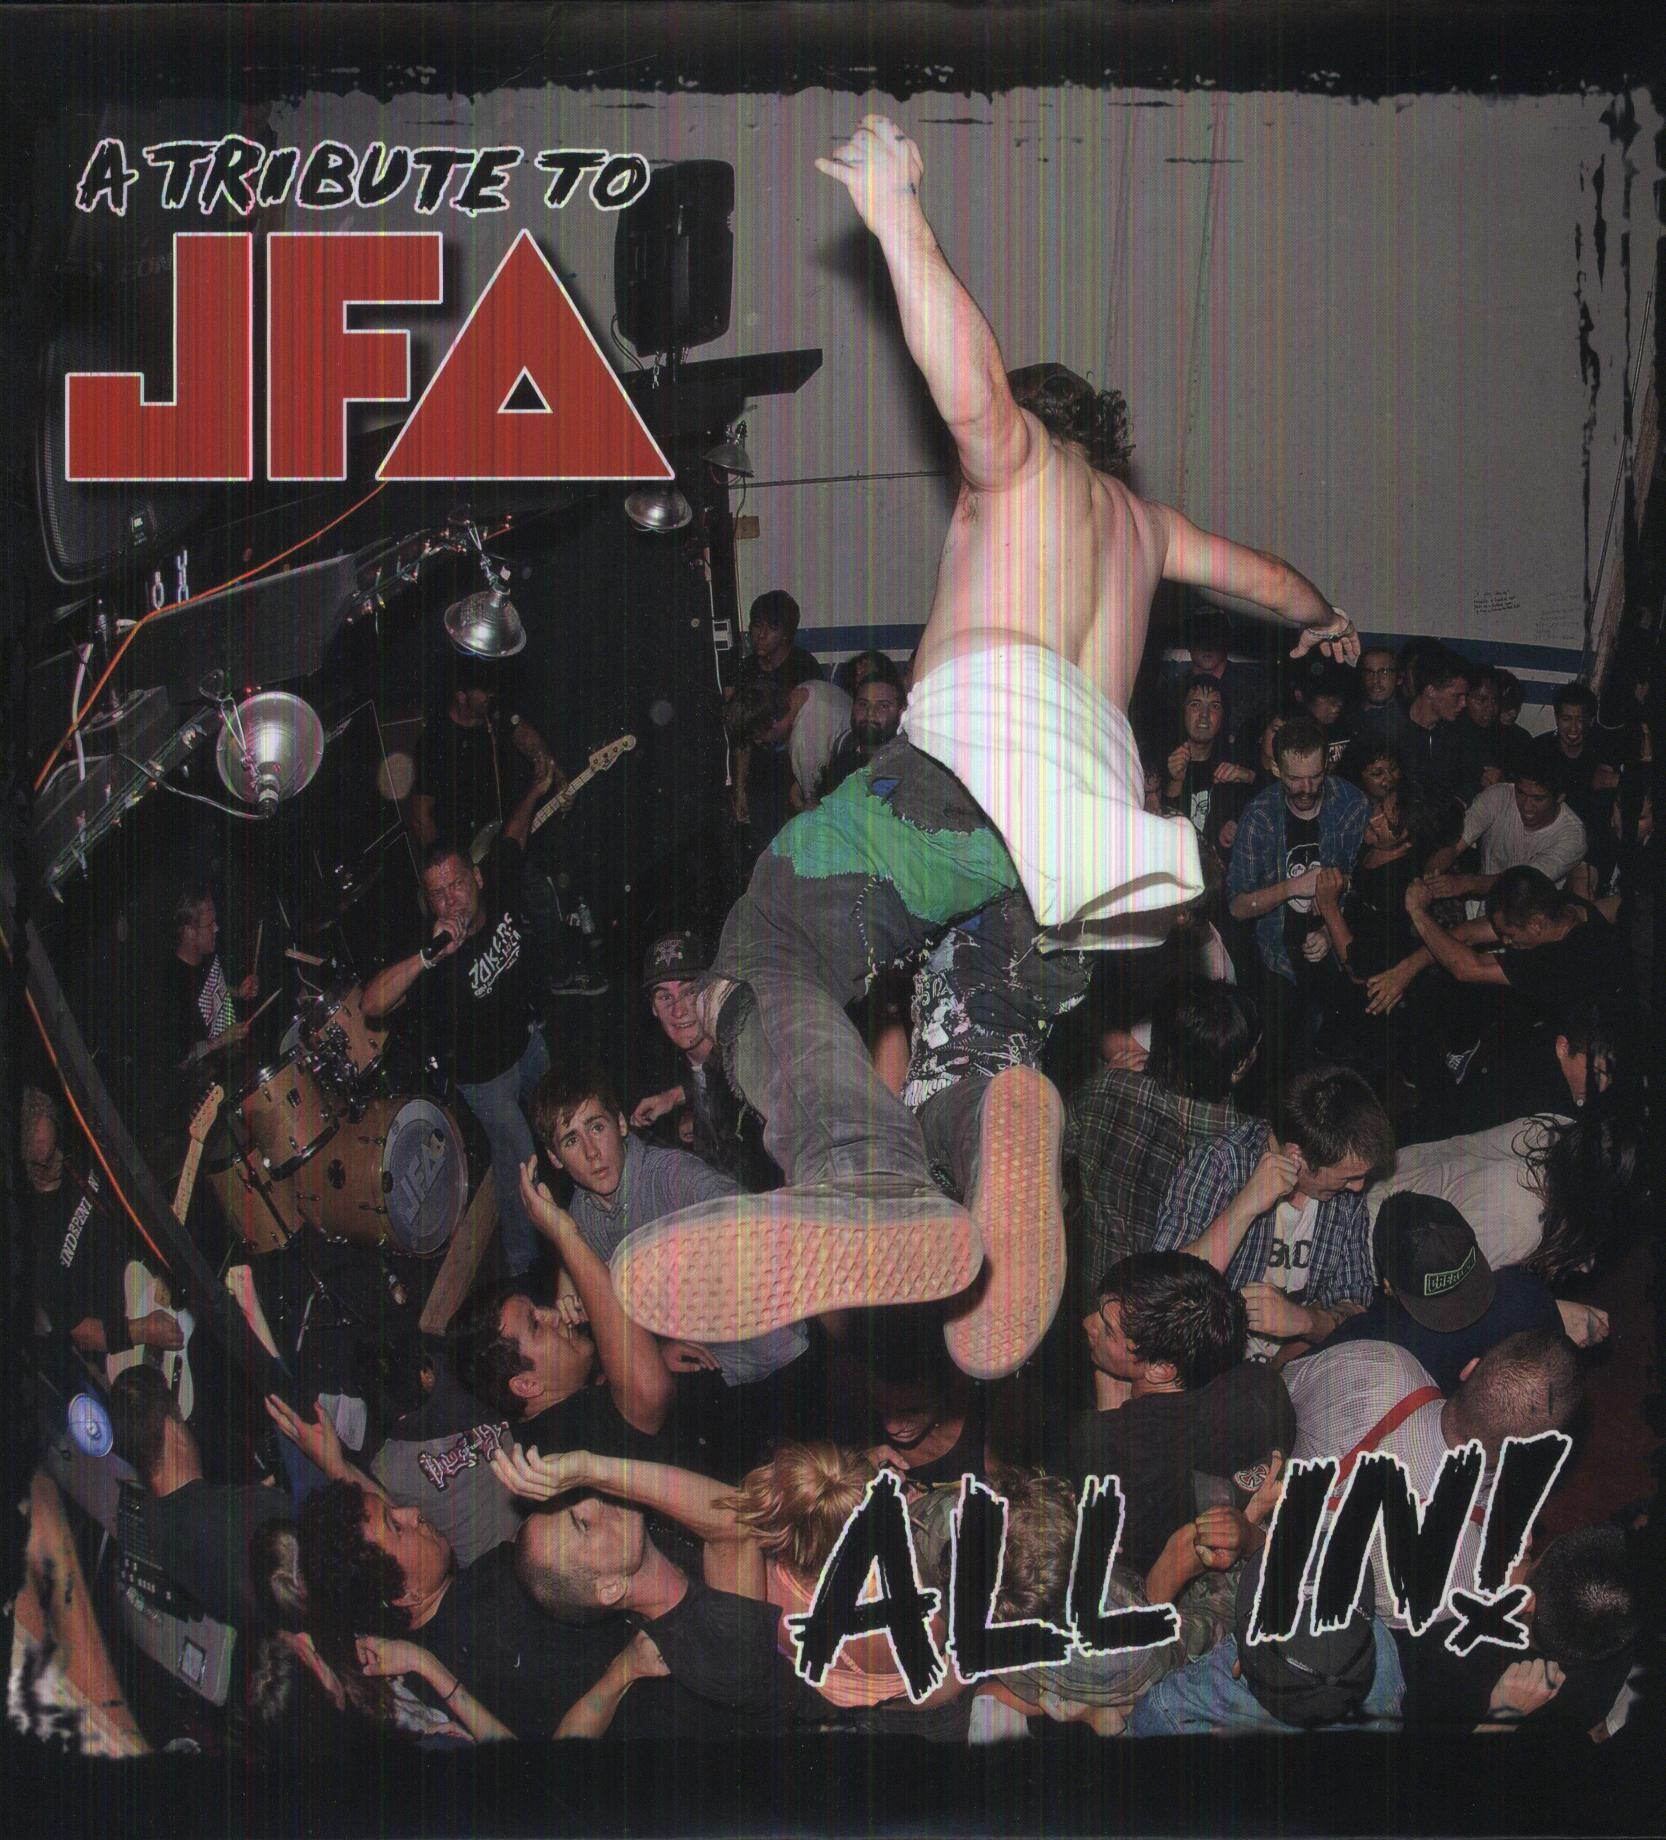 ALL IN: A TRIBUTE TO JFA / VARIOUS